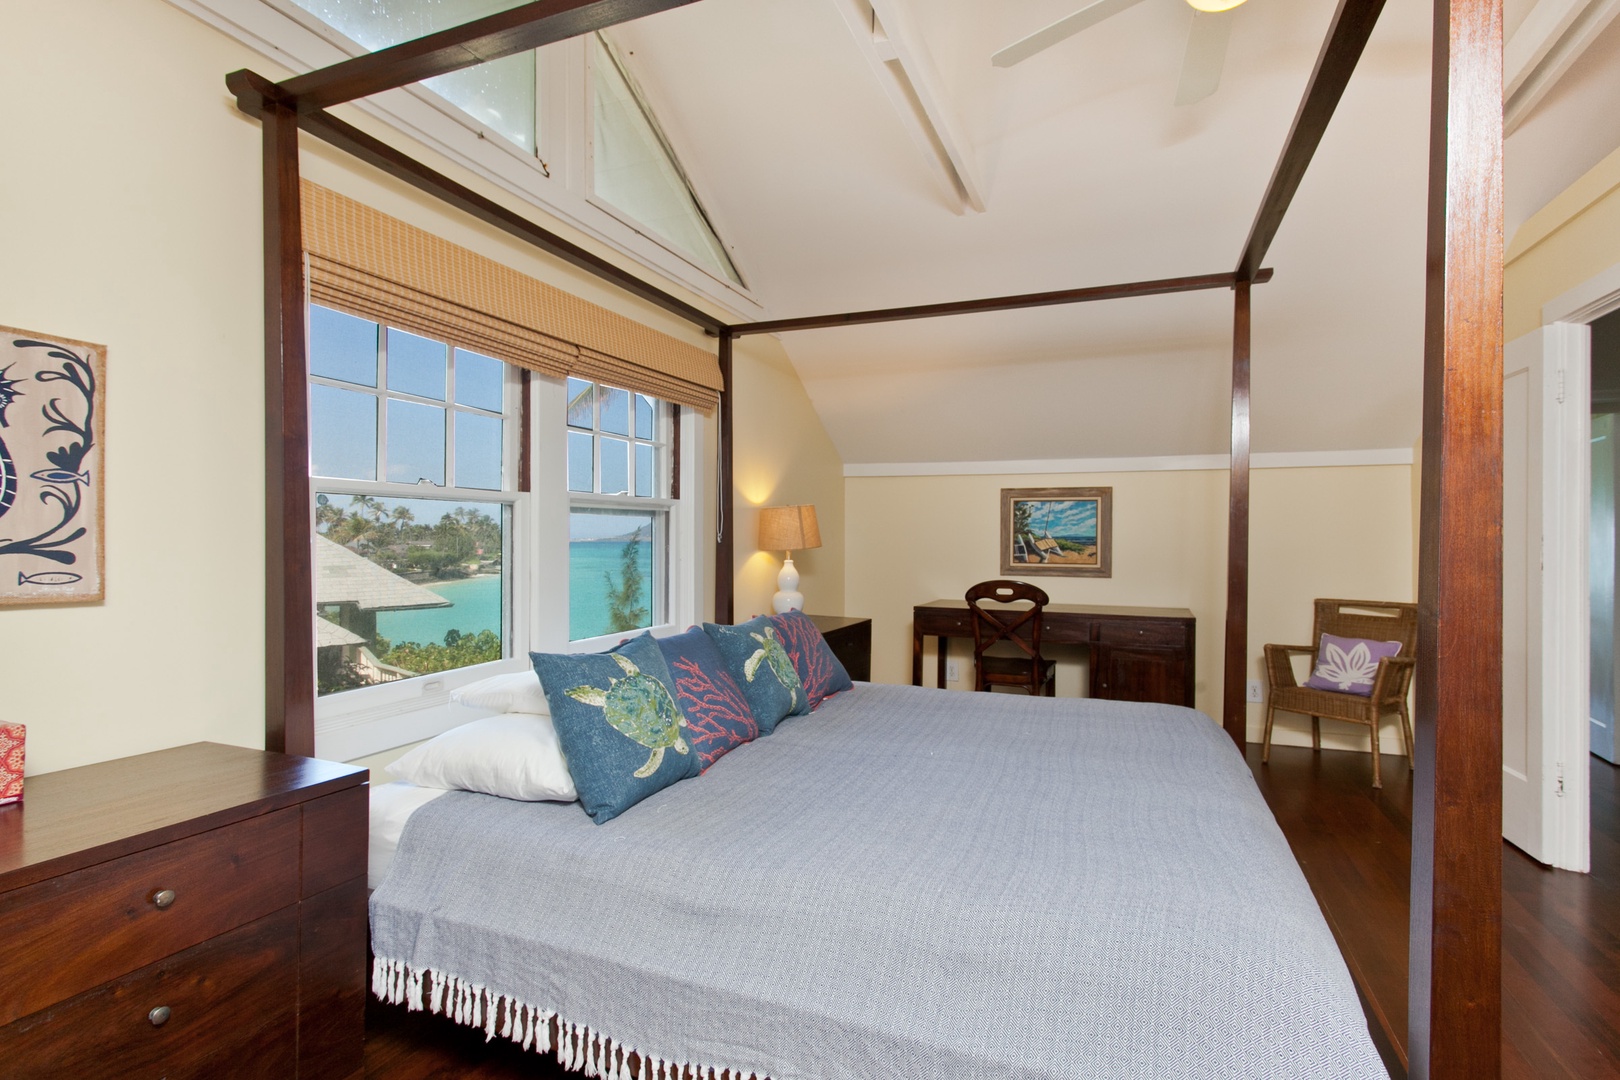 Kailua Vacation Rentals, Hale Mahina Lanikai* - Wake up to breathtaking views in our primary bedroom with four-poster king bed.